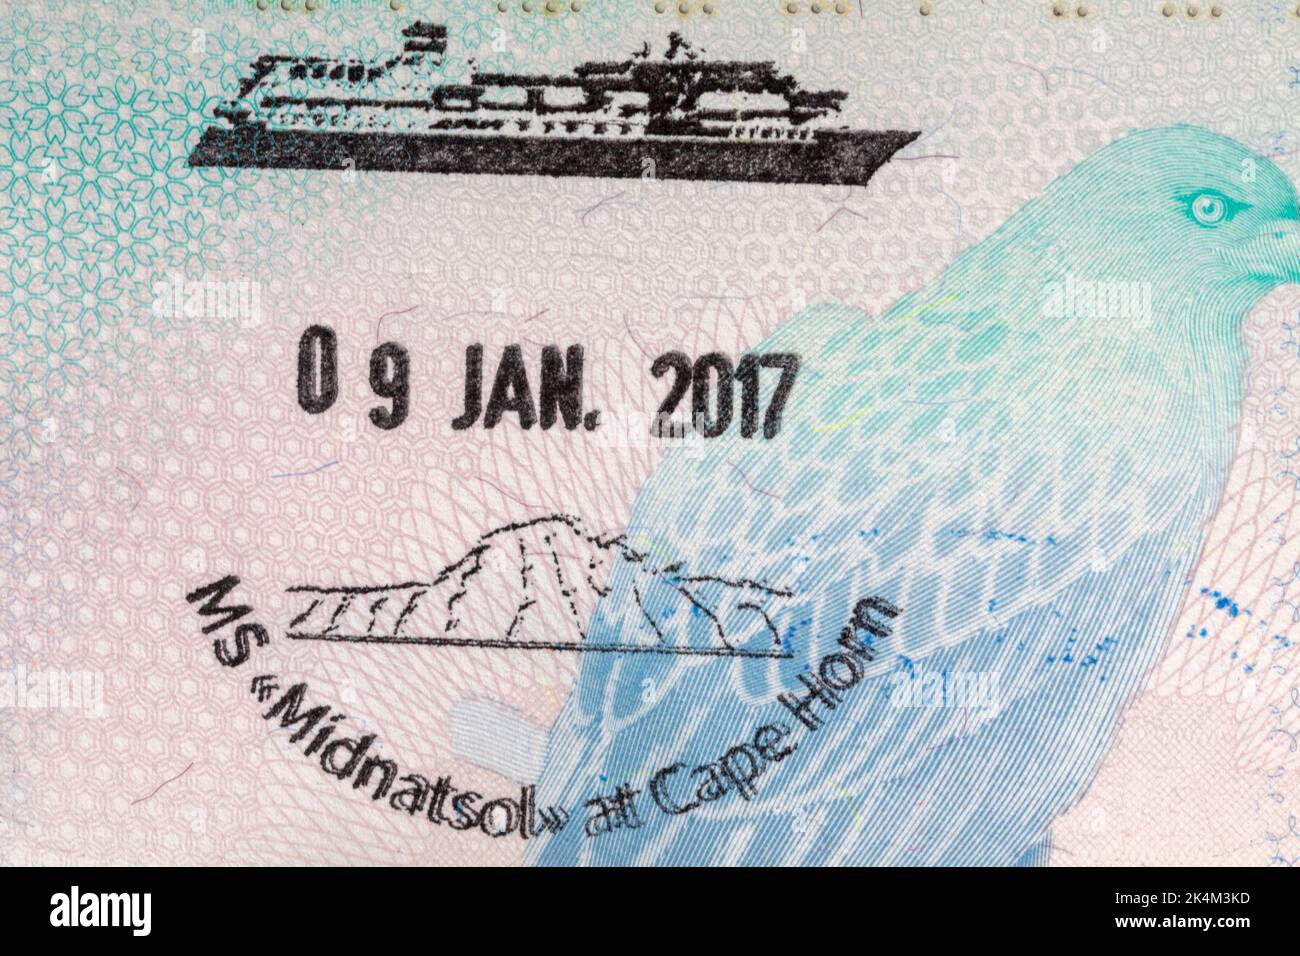 MS Midnatsol at Cape Horn 09 Jan 2017 stamp in British passport Stock Photo